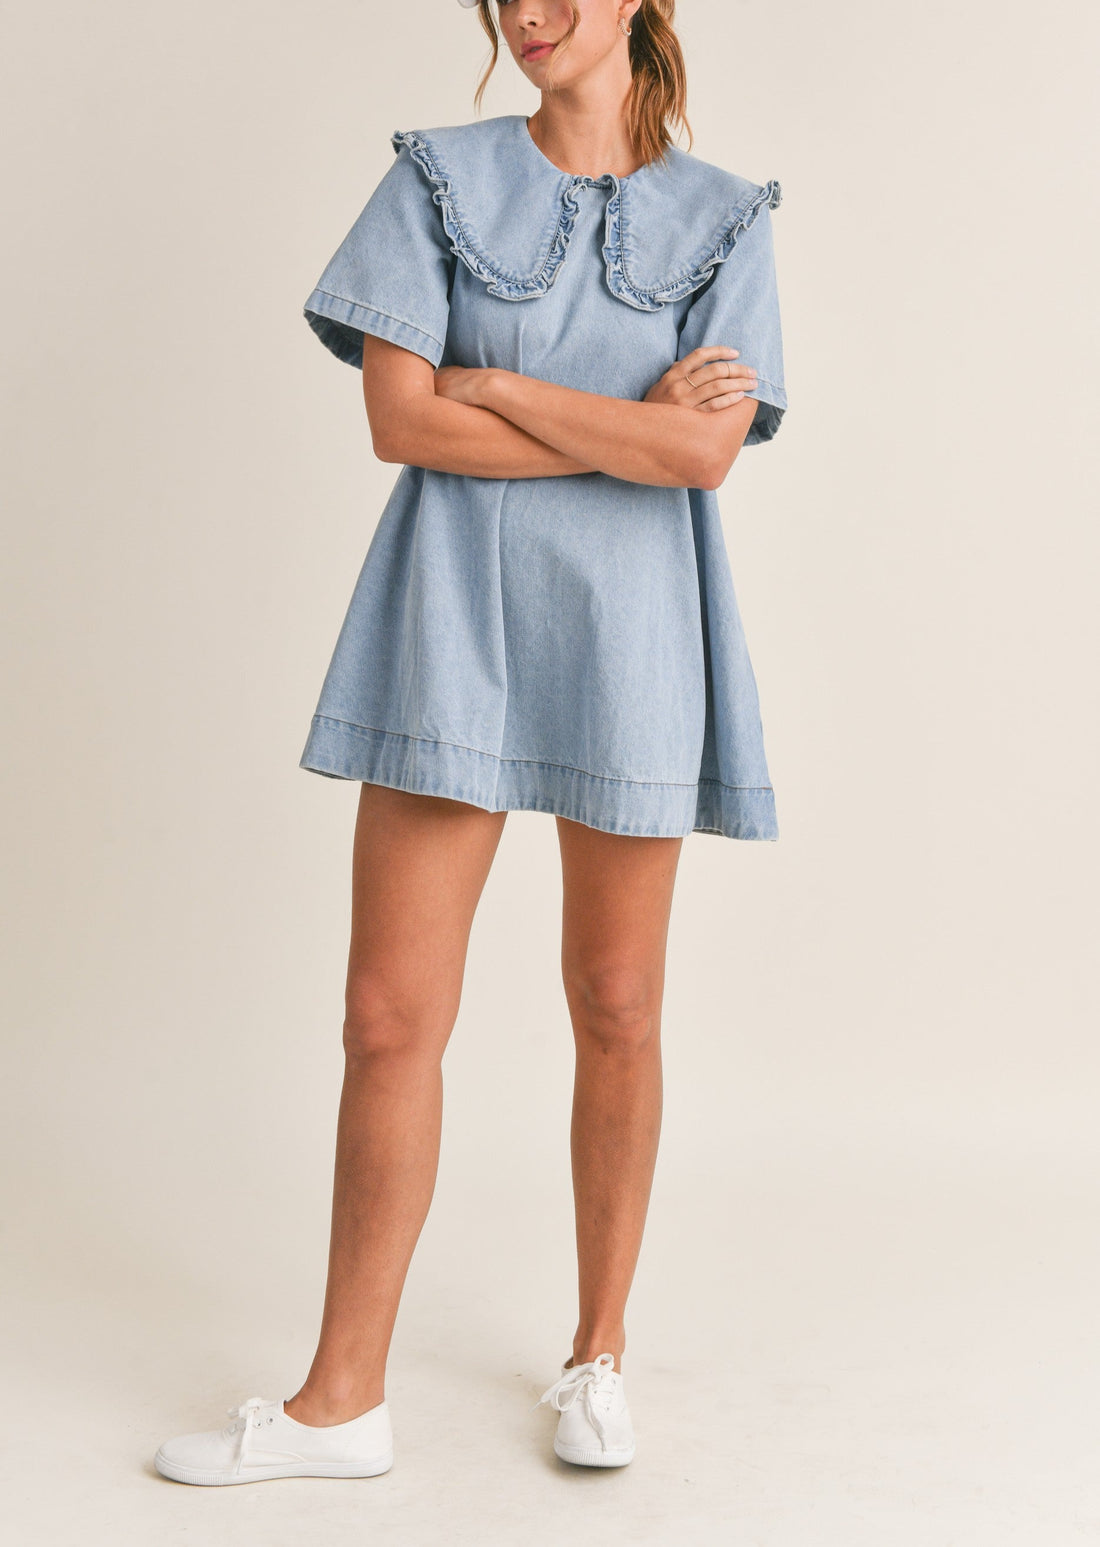 TheyLook Womens Denim Babydoll Dresses Button Down Tiered Jean Dress at  Amazon Women's Clothing store